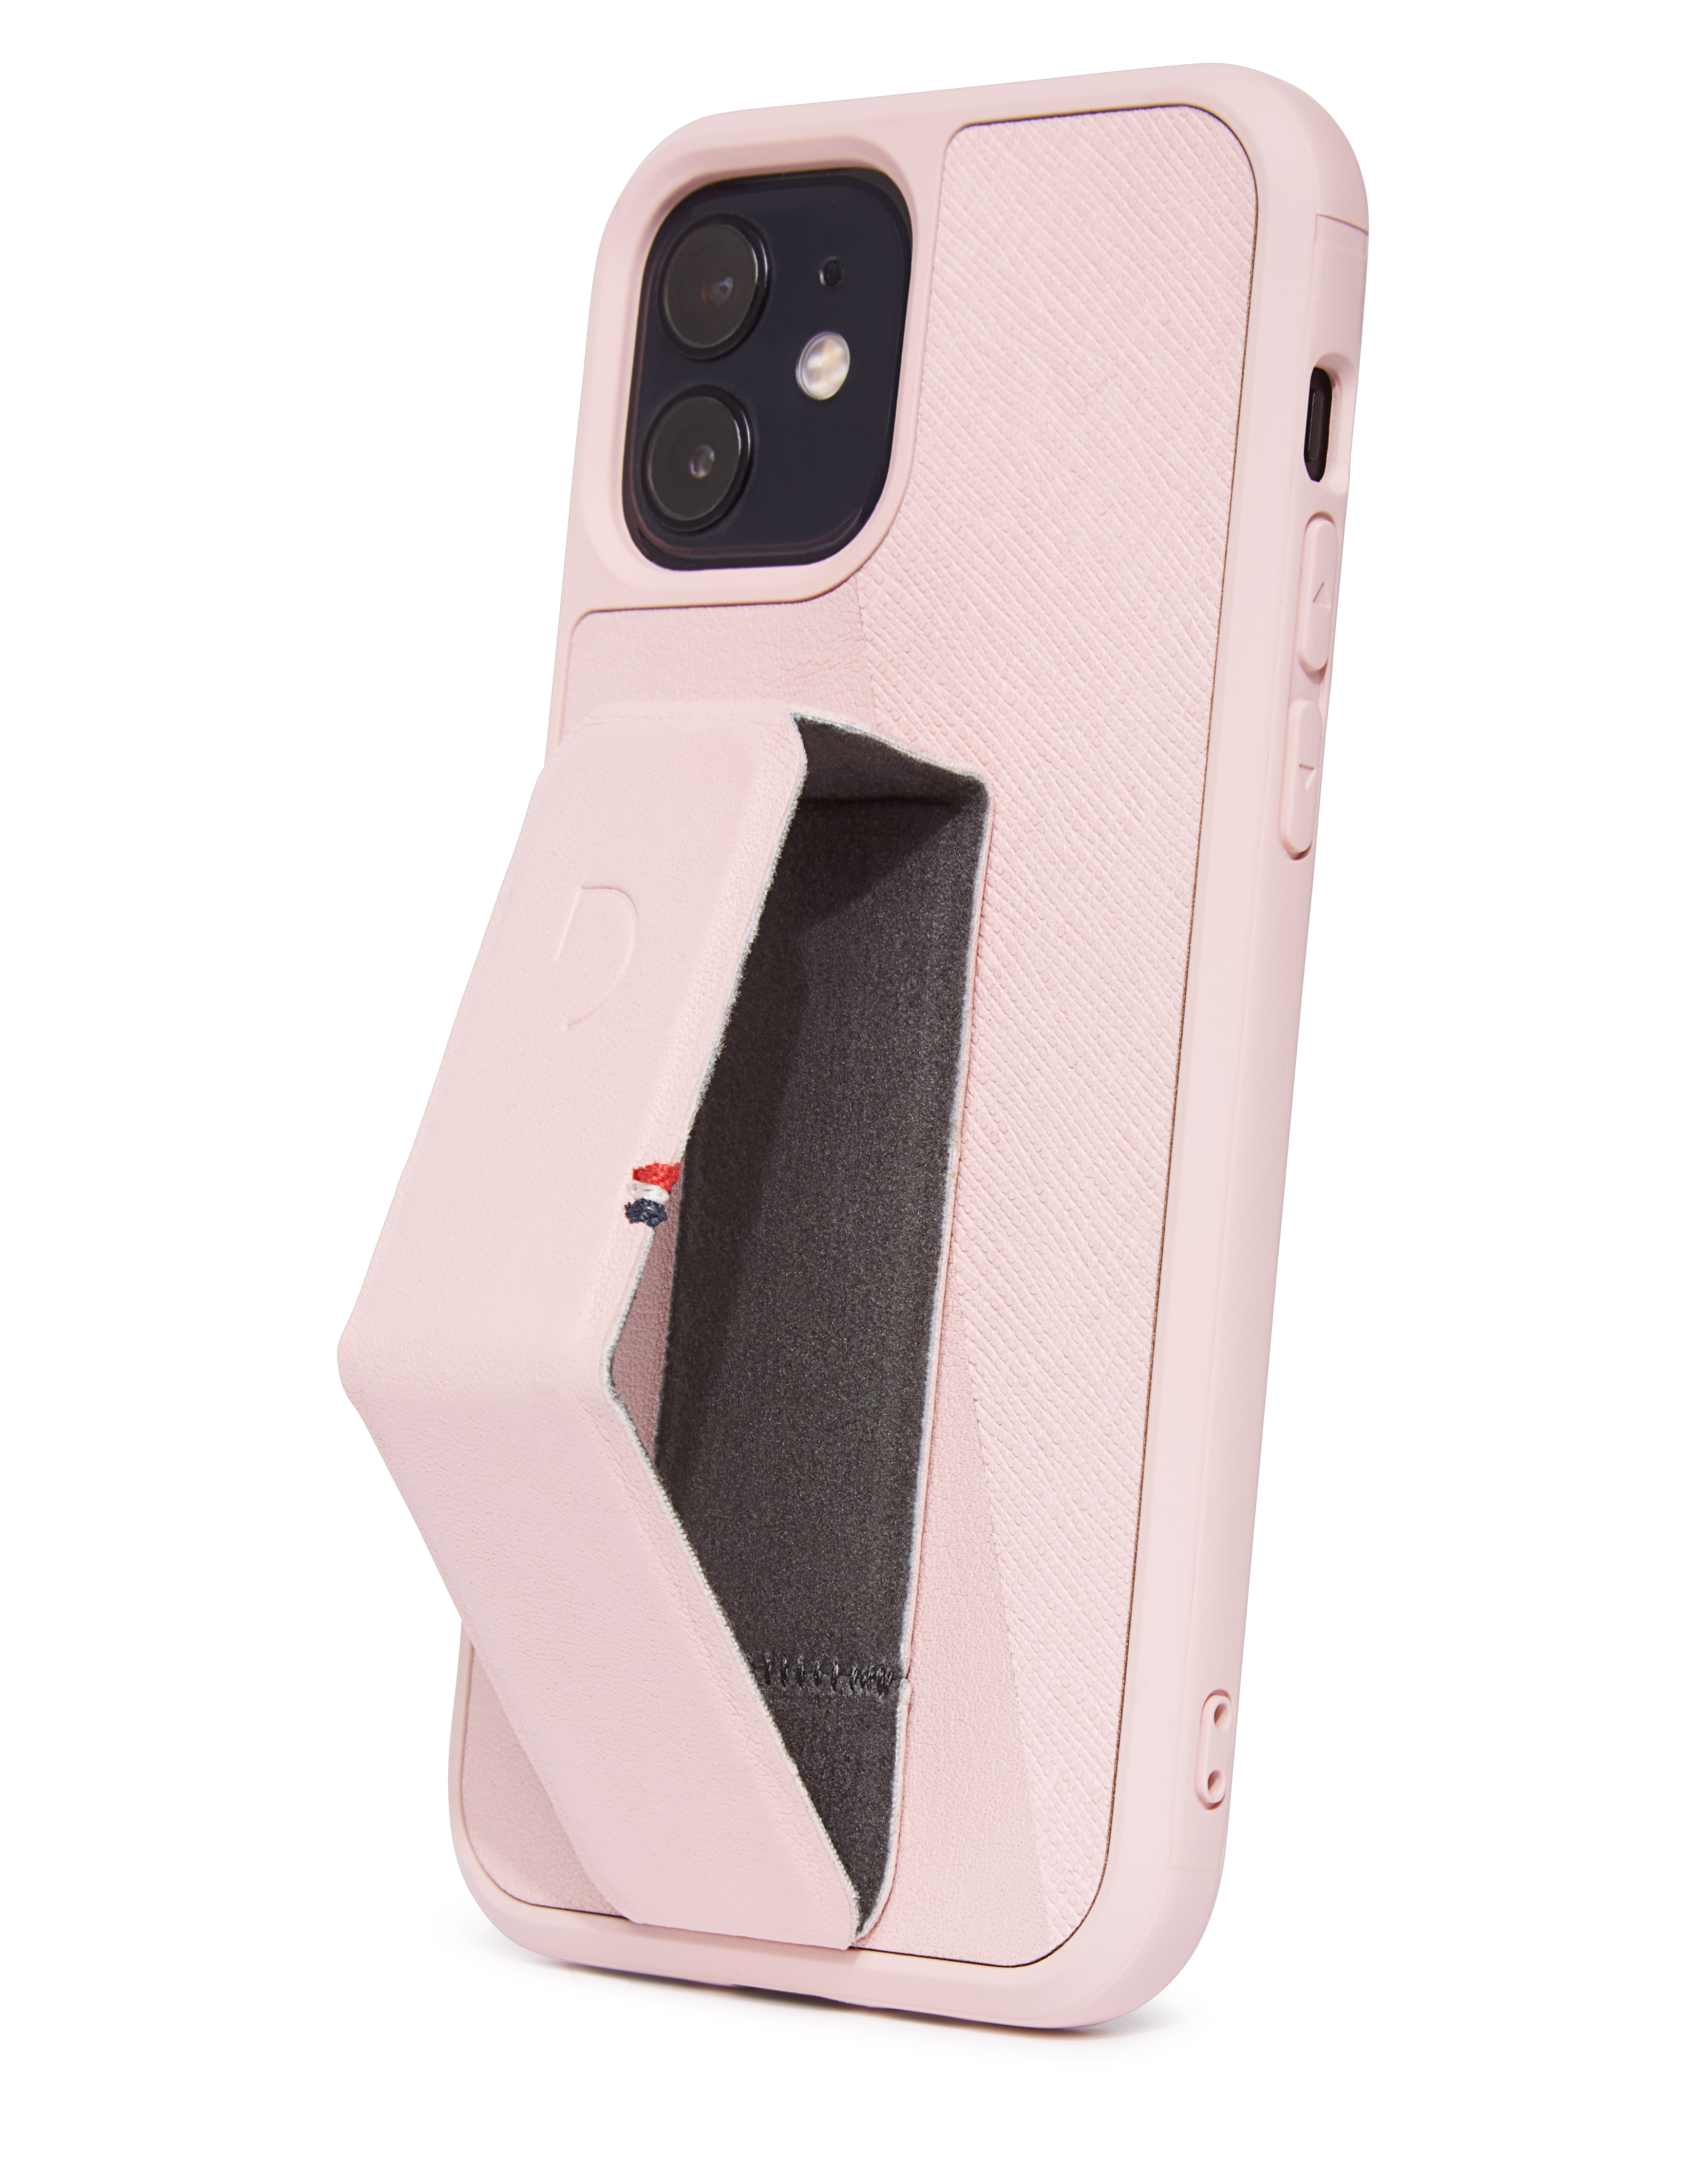 Apple, iPhone DECODED iPhone Pro Case, inch), Backcover, / Stand (6.1 Silberrosa 12 12